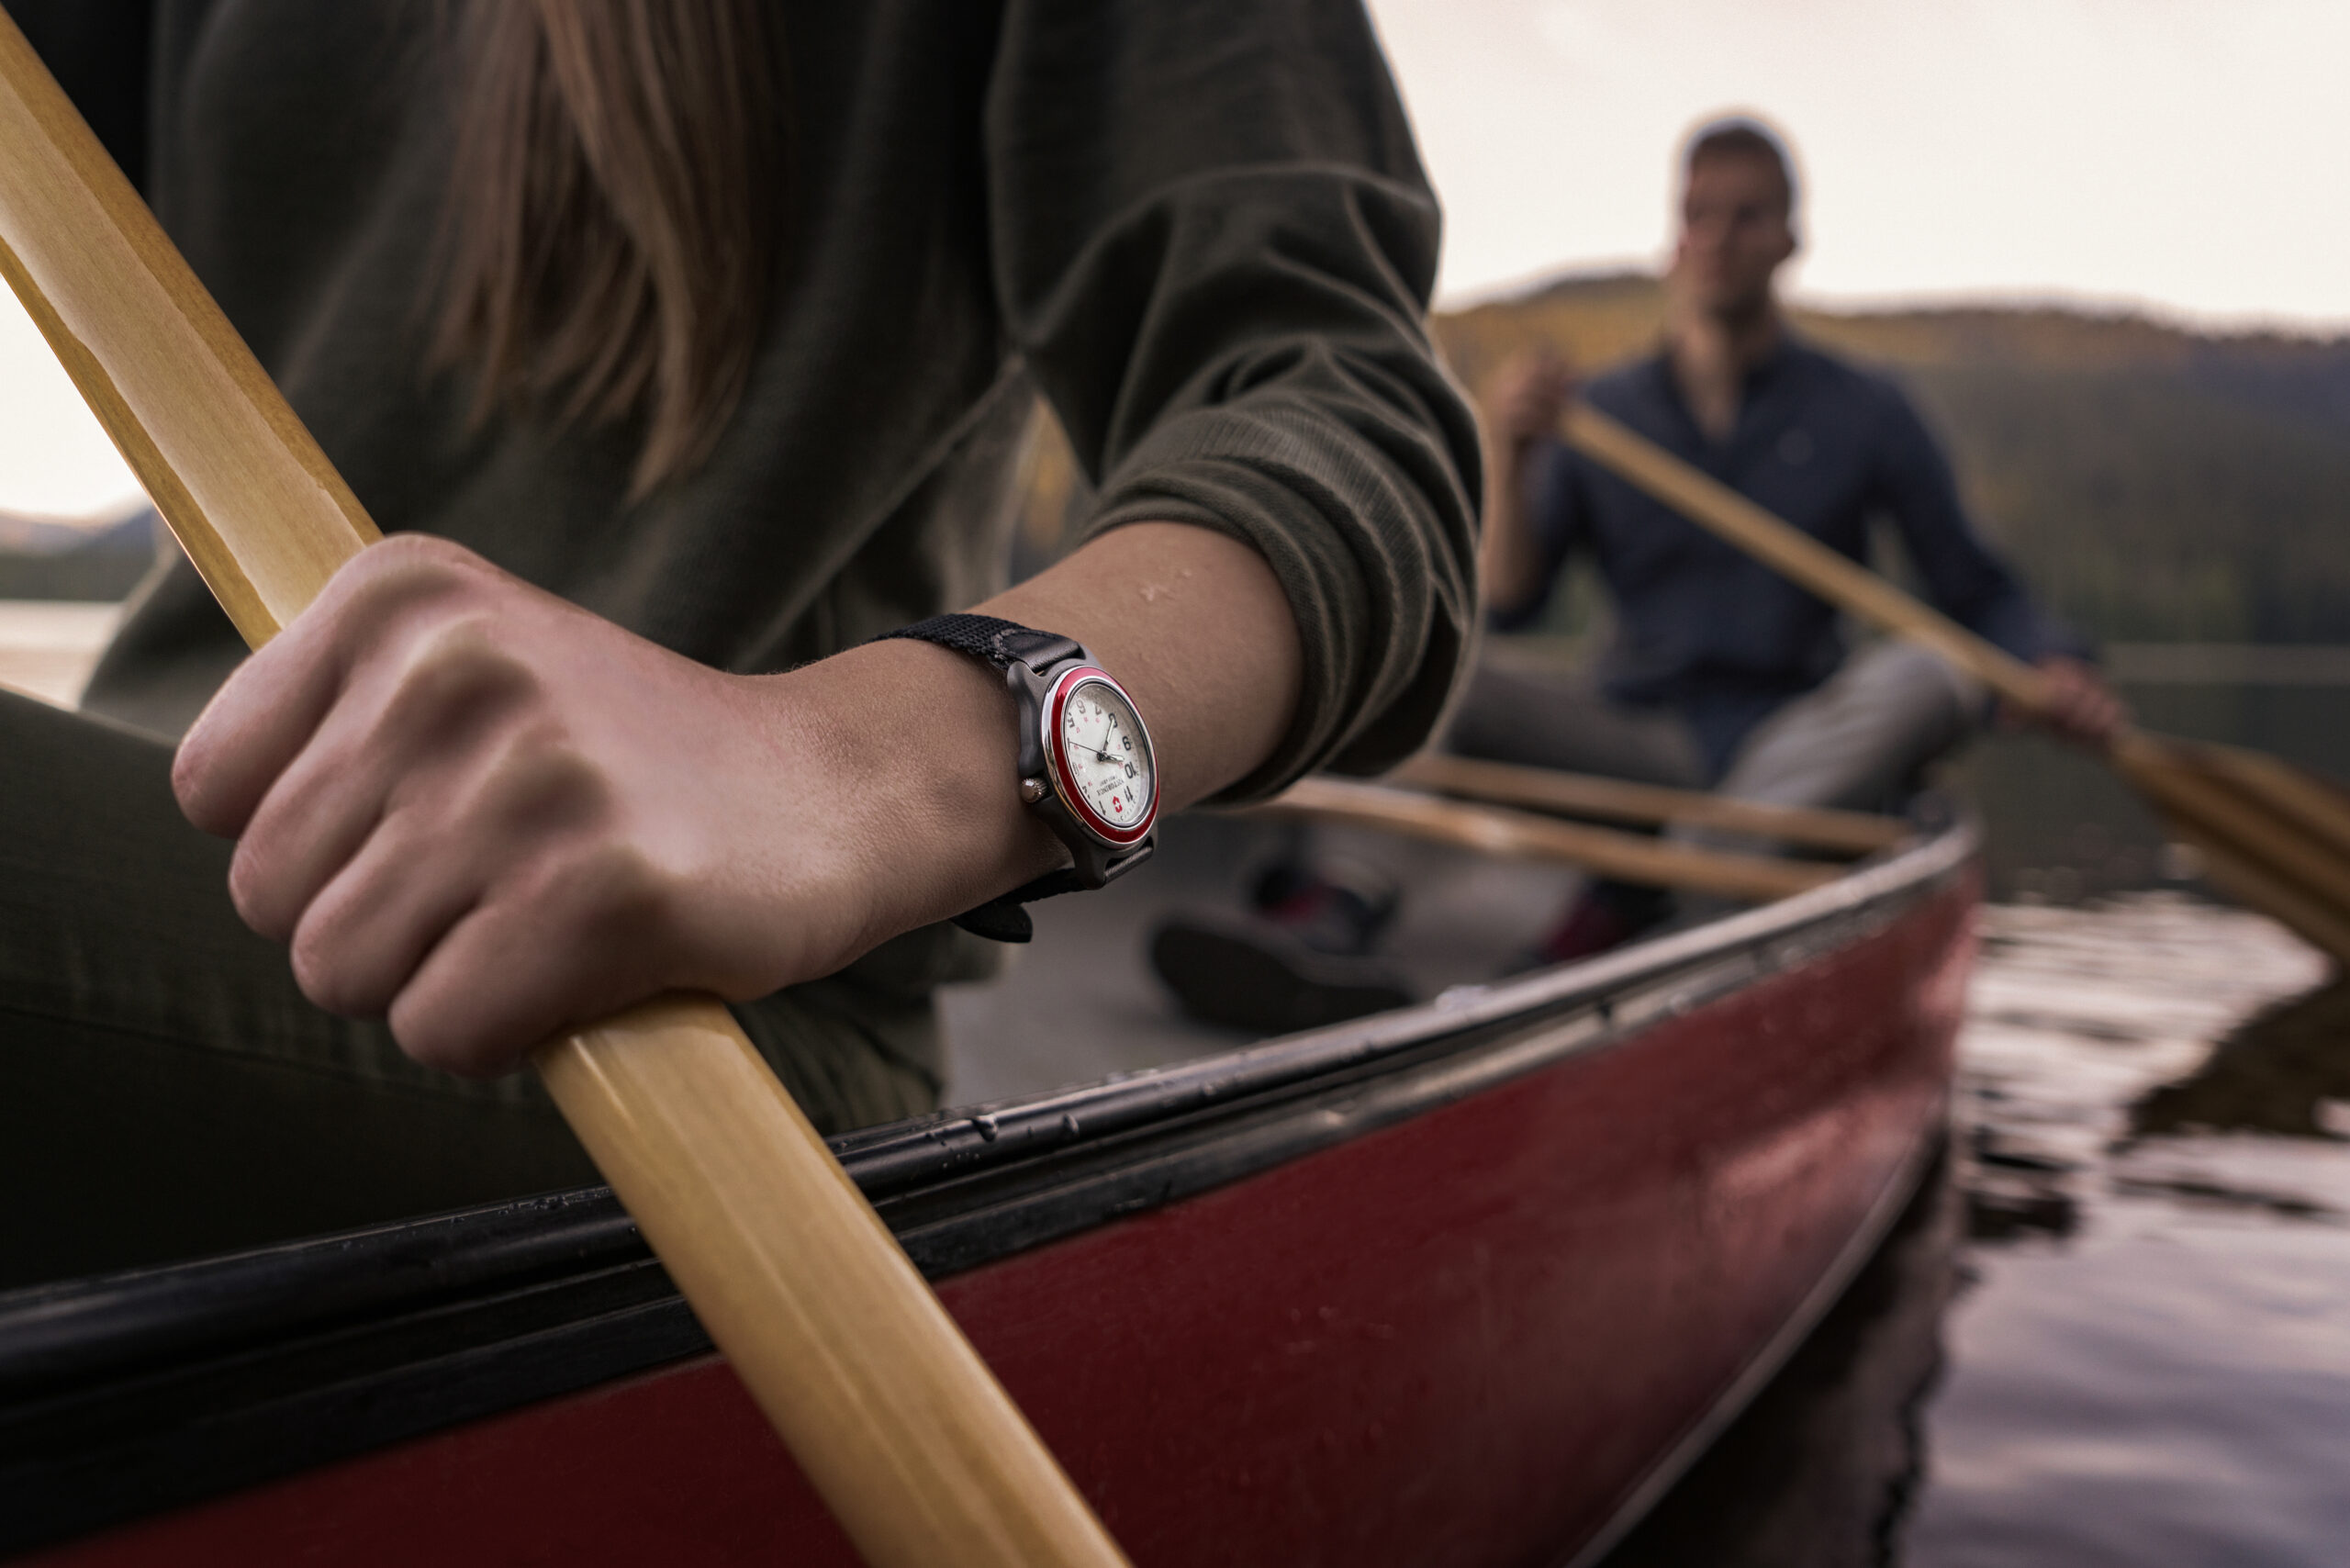 Commercial lifestyle photography shot of a woman on a canoe for Victorinox Swiss Army